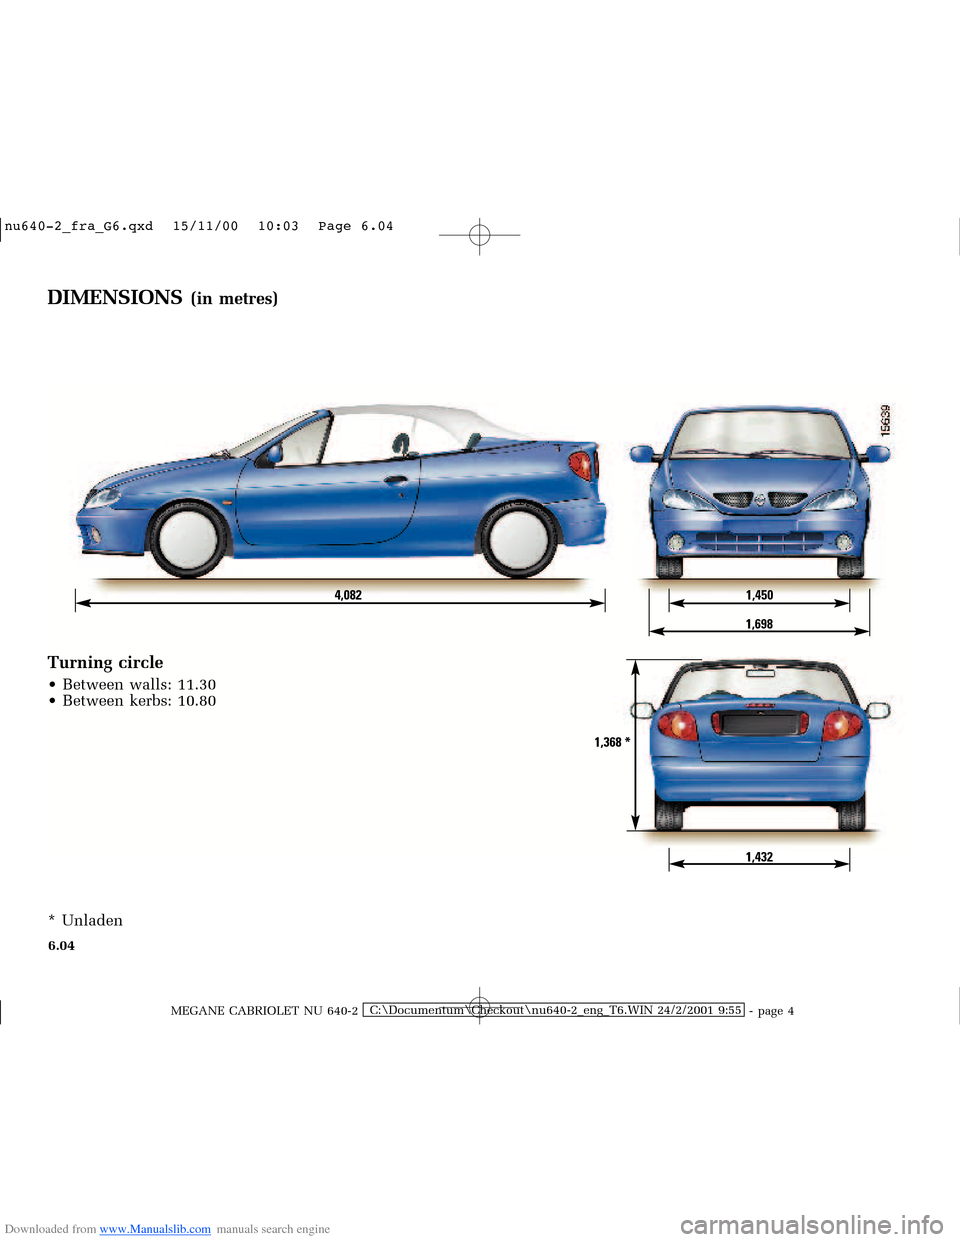 RENAULT MEGANE 2000 X64 / 1.G Owners Manual Downloaded from www.Manualslib.com manuals search engine 4,082 1,450
1,698
1,432 1,368 *
�Q�X������B�I�U�D�B�*���T�[�G� � ��������� � ������ � �3�D�J�H� ����
MEGANE CABR